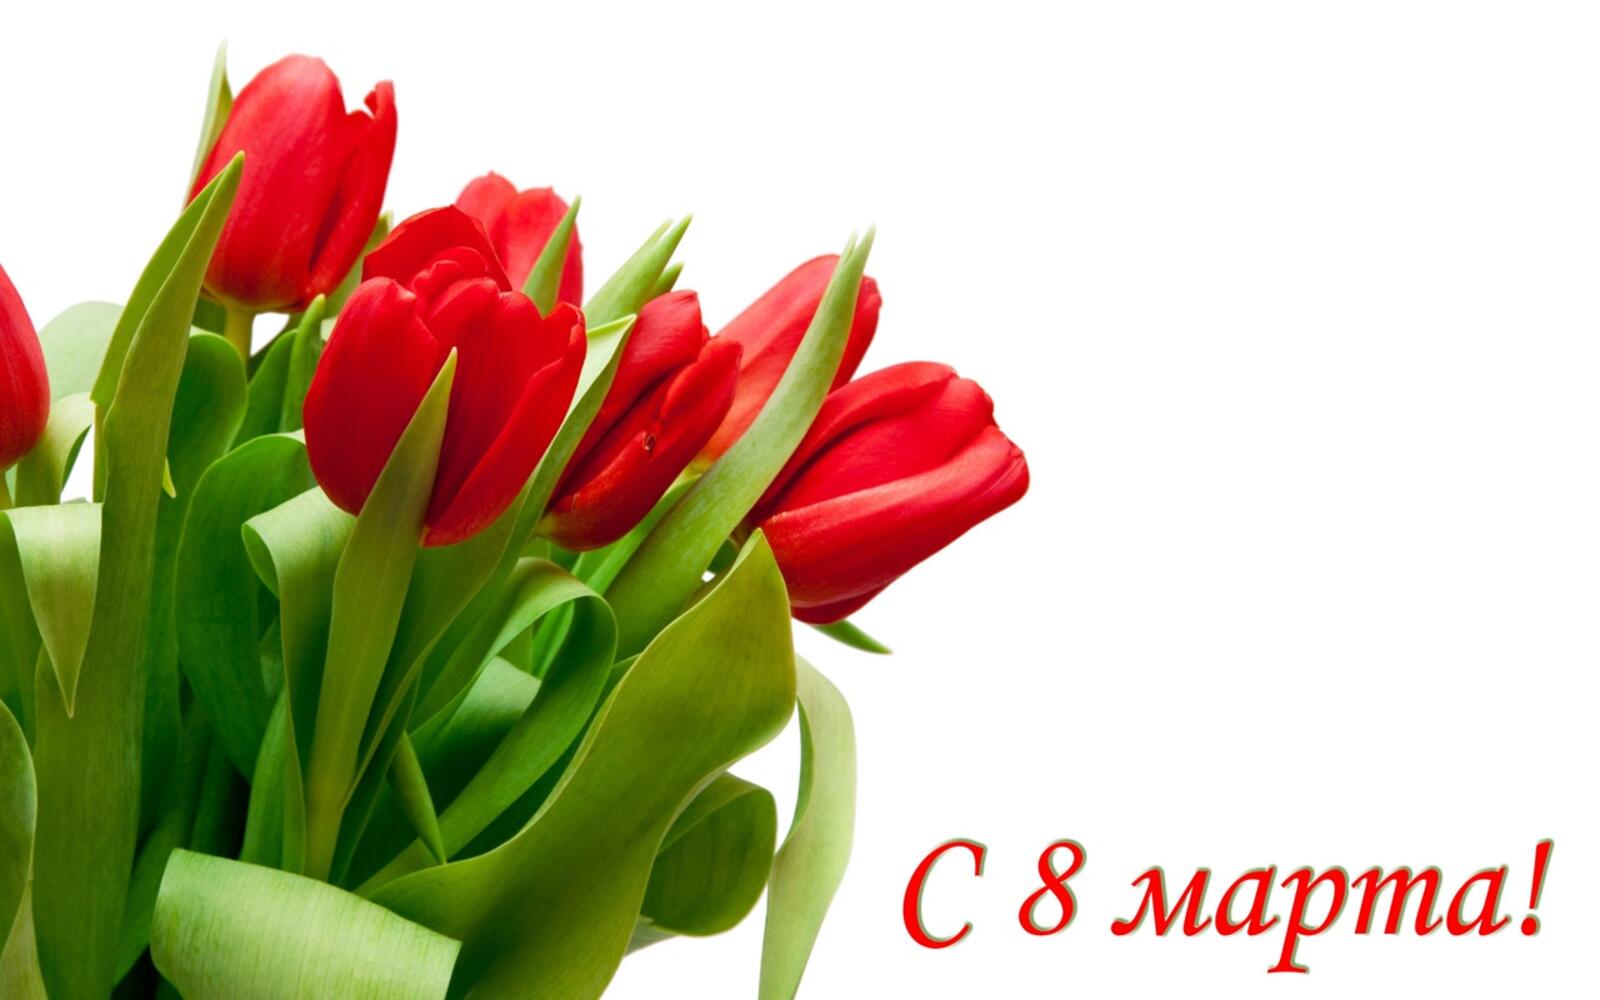 A bouquet of red tulips for March 8.